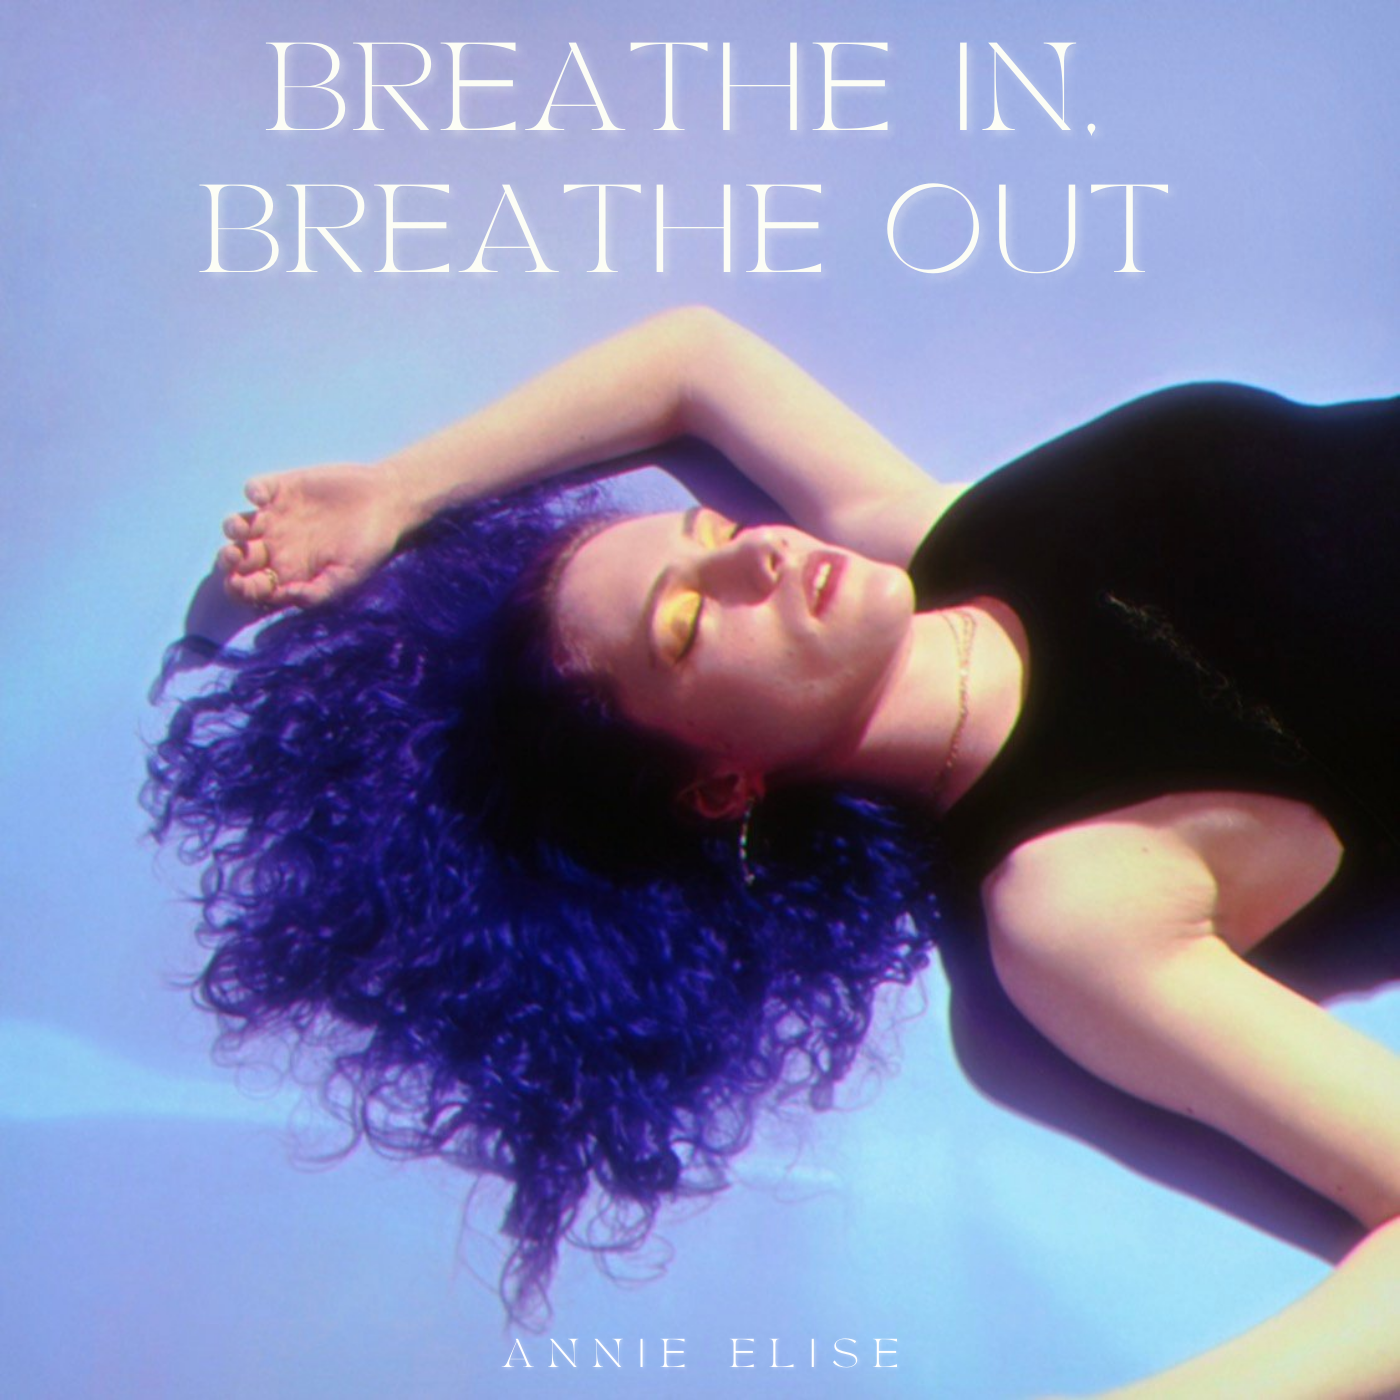 Breathe In, Breathe Out - Cover Art.png